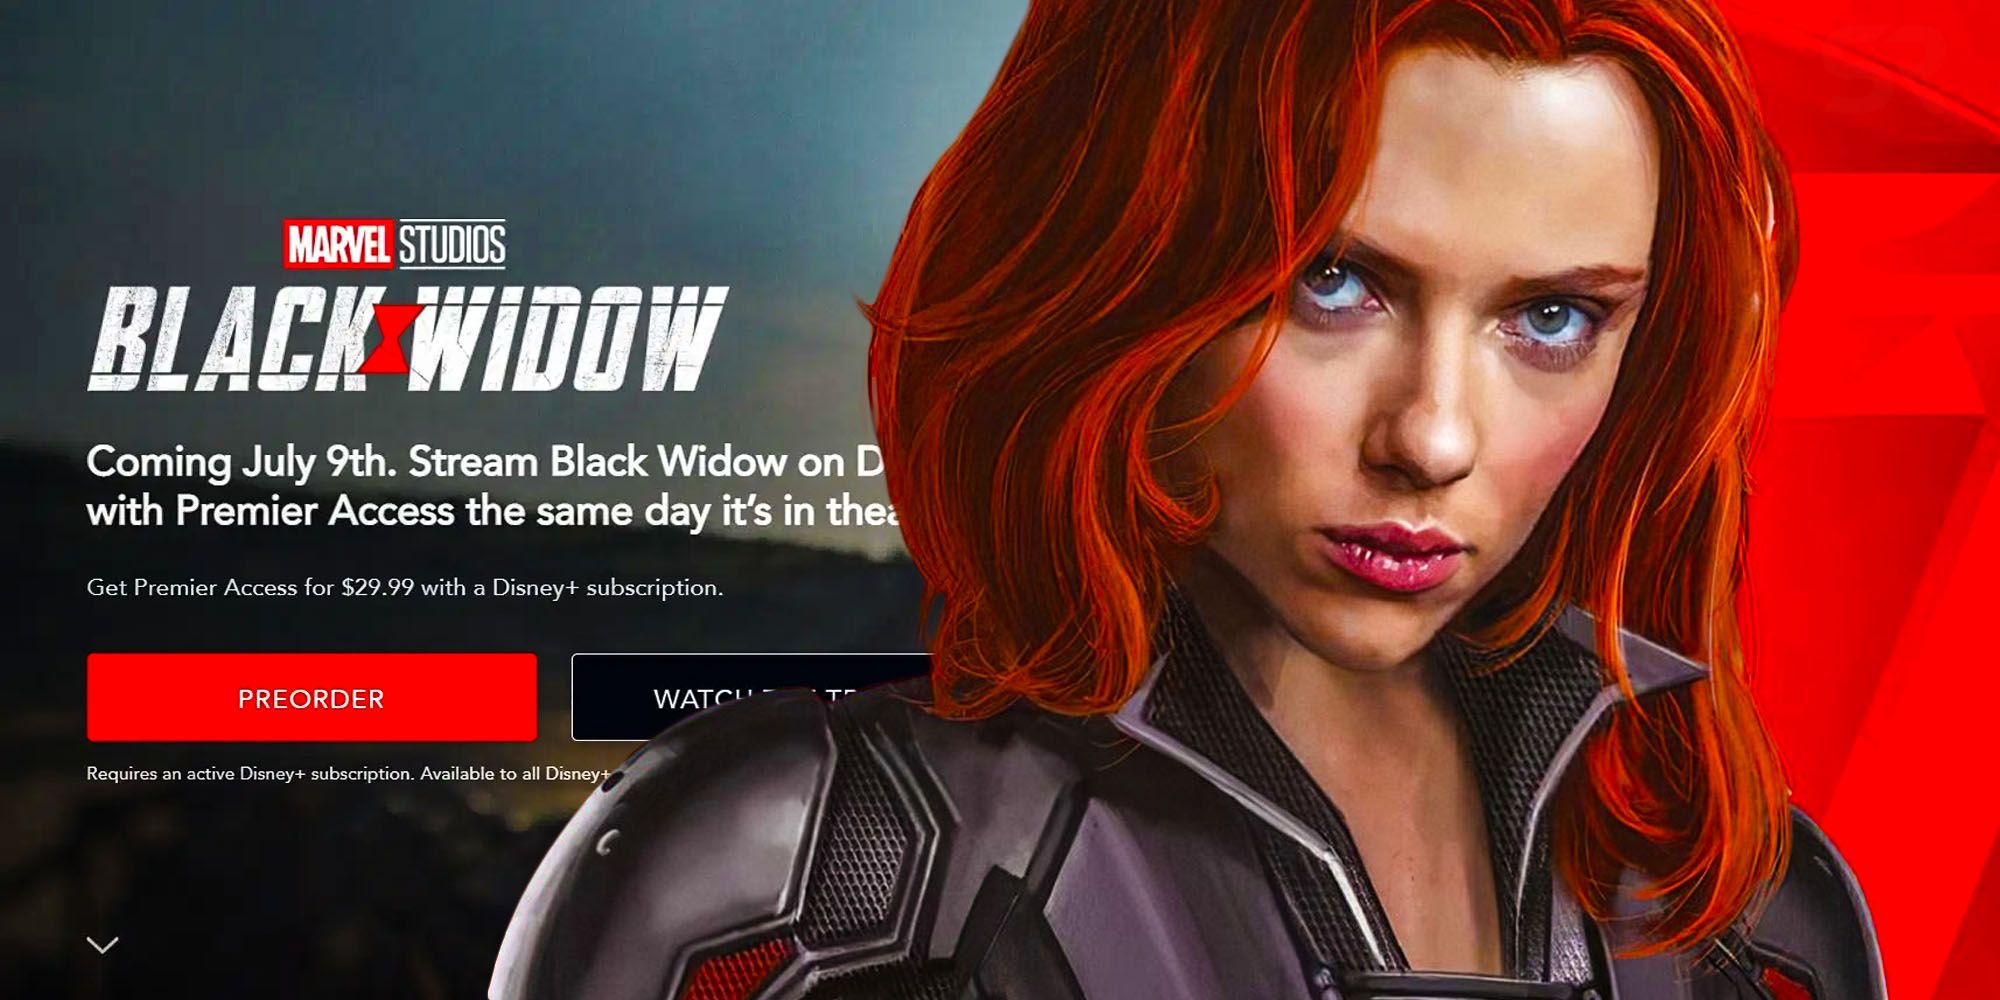 Black Widow Proves Box Office and Streaming Can Coexist (If They Adapt)